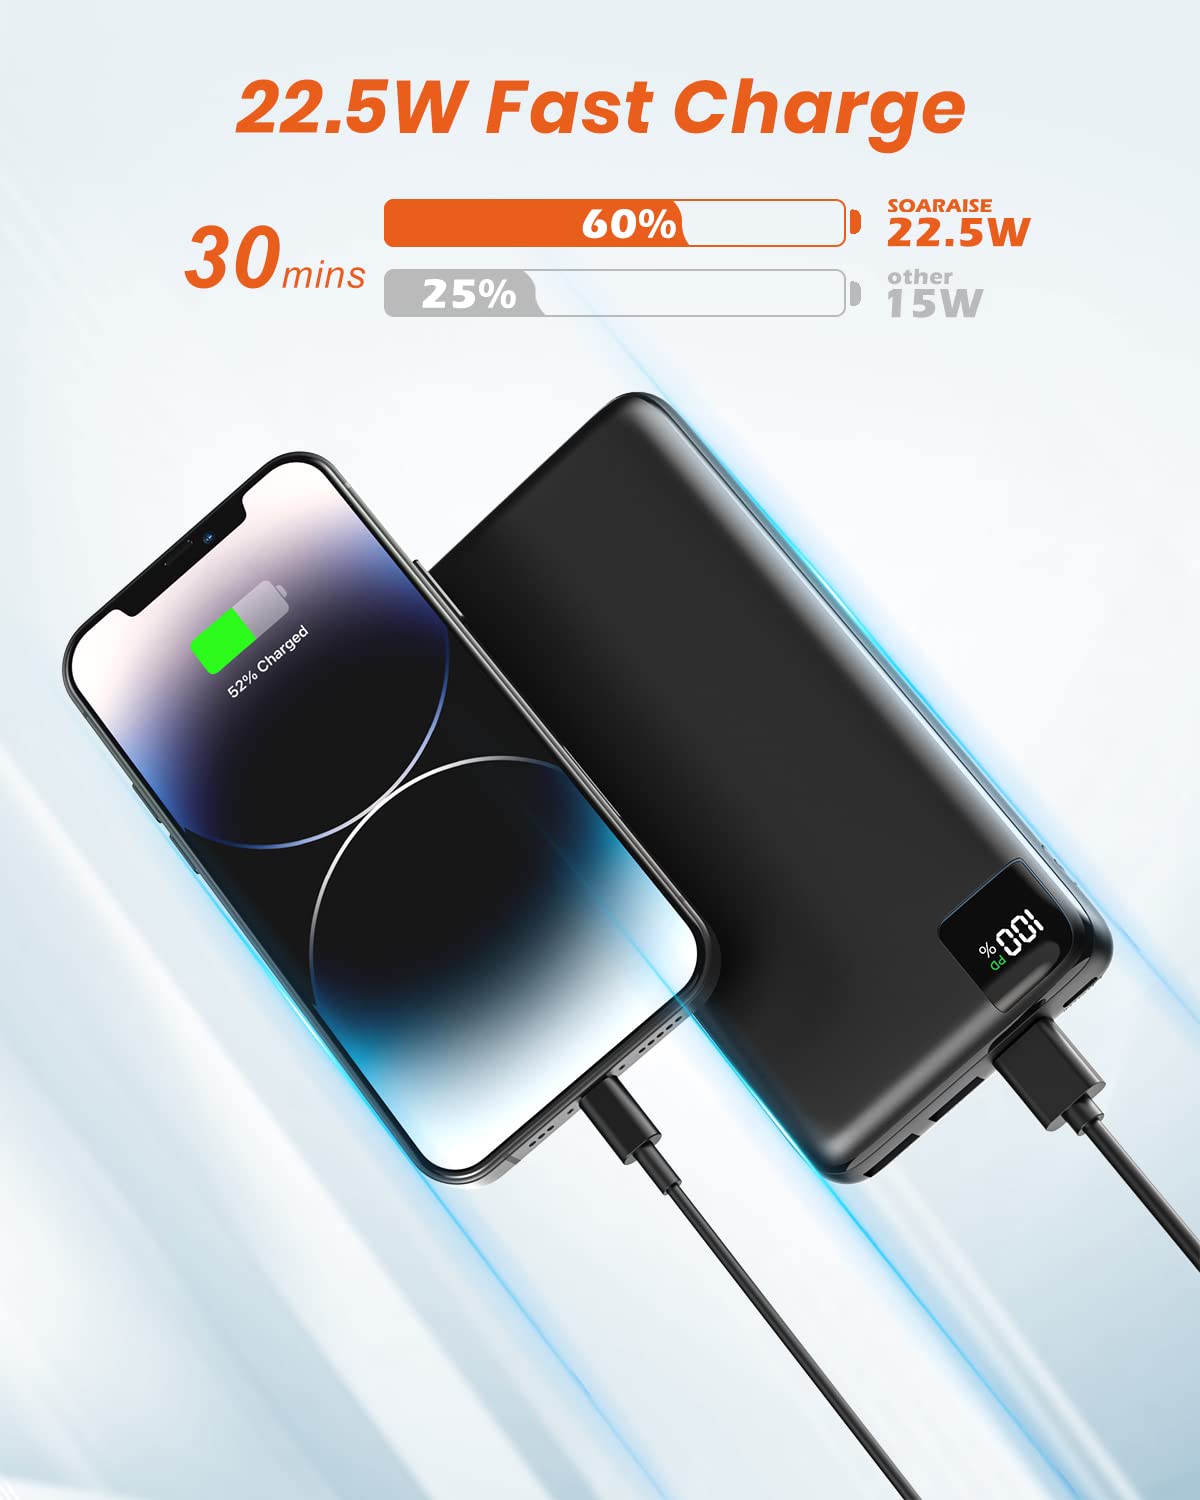 FEELLE Portable Charger Power Bank 27000mAh 22.5W Fast Charging Phone Charger USB-C PD QC 3.0 Battery Pack with 4 Outputs for iPhone Samsung Tablet